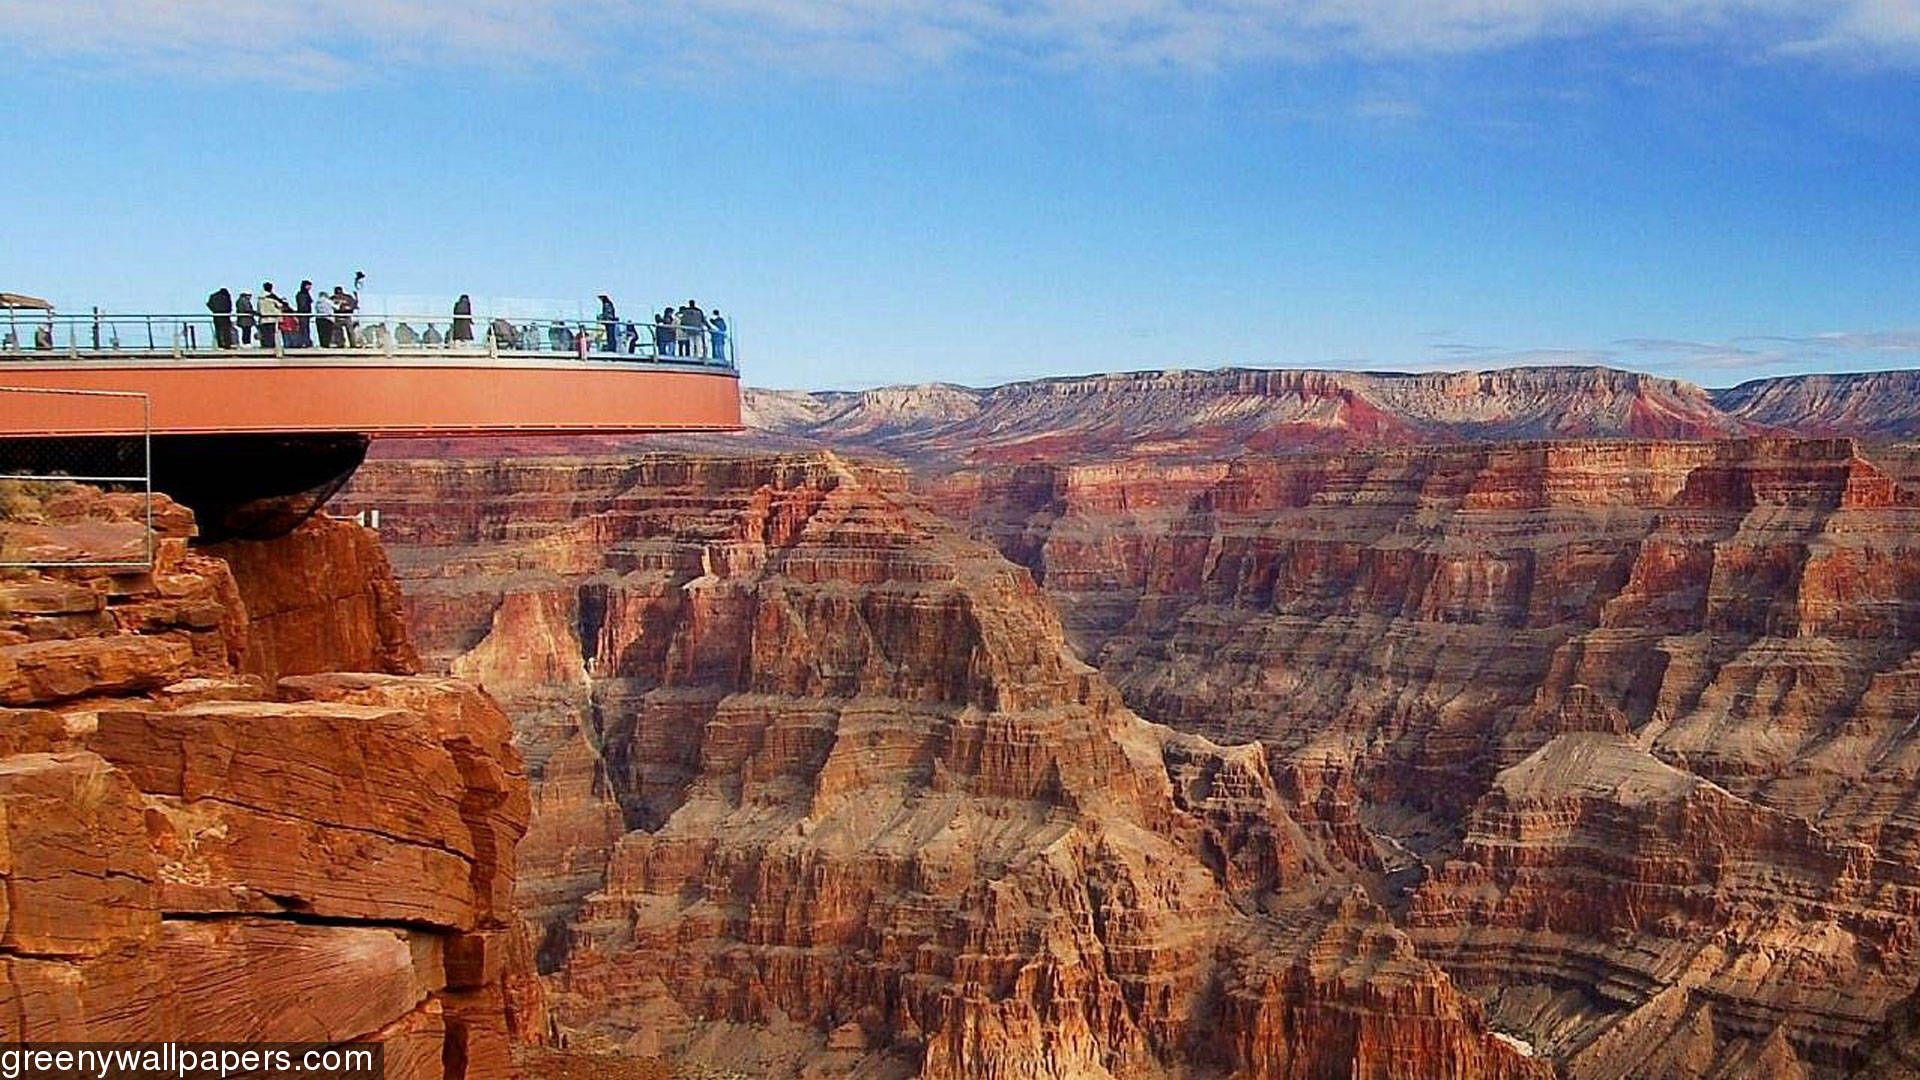 The Grand Canyon Wallpaper, PC The Grand Canyon Awesome. Image